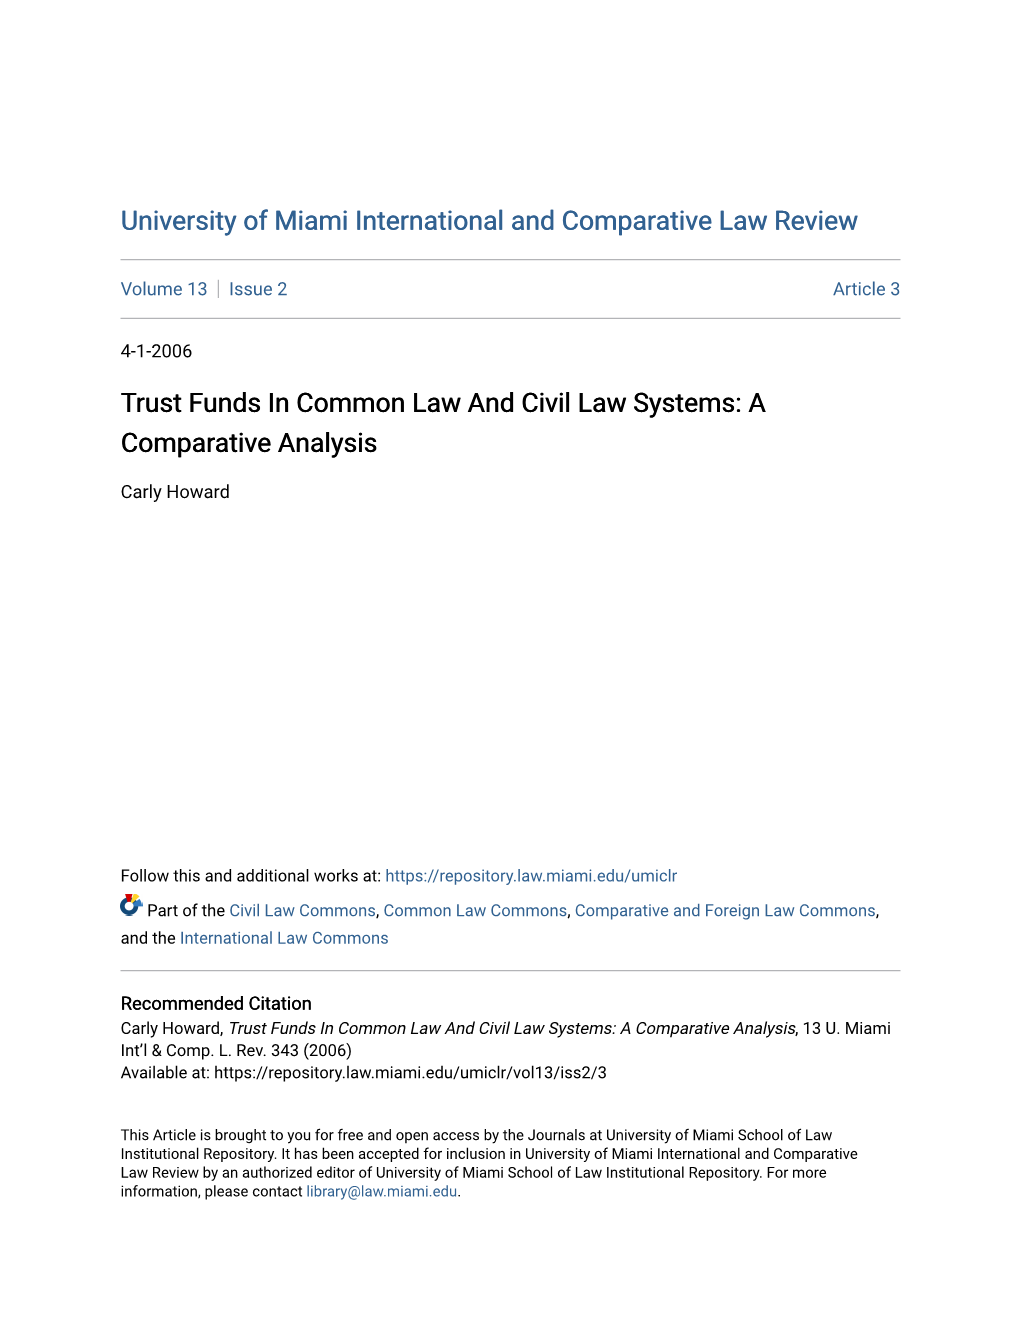 Trust Funds in Common Law and Civil Law Systems: a Comparative Analysis